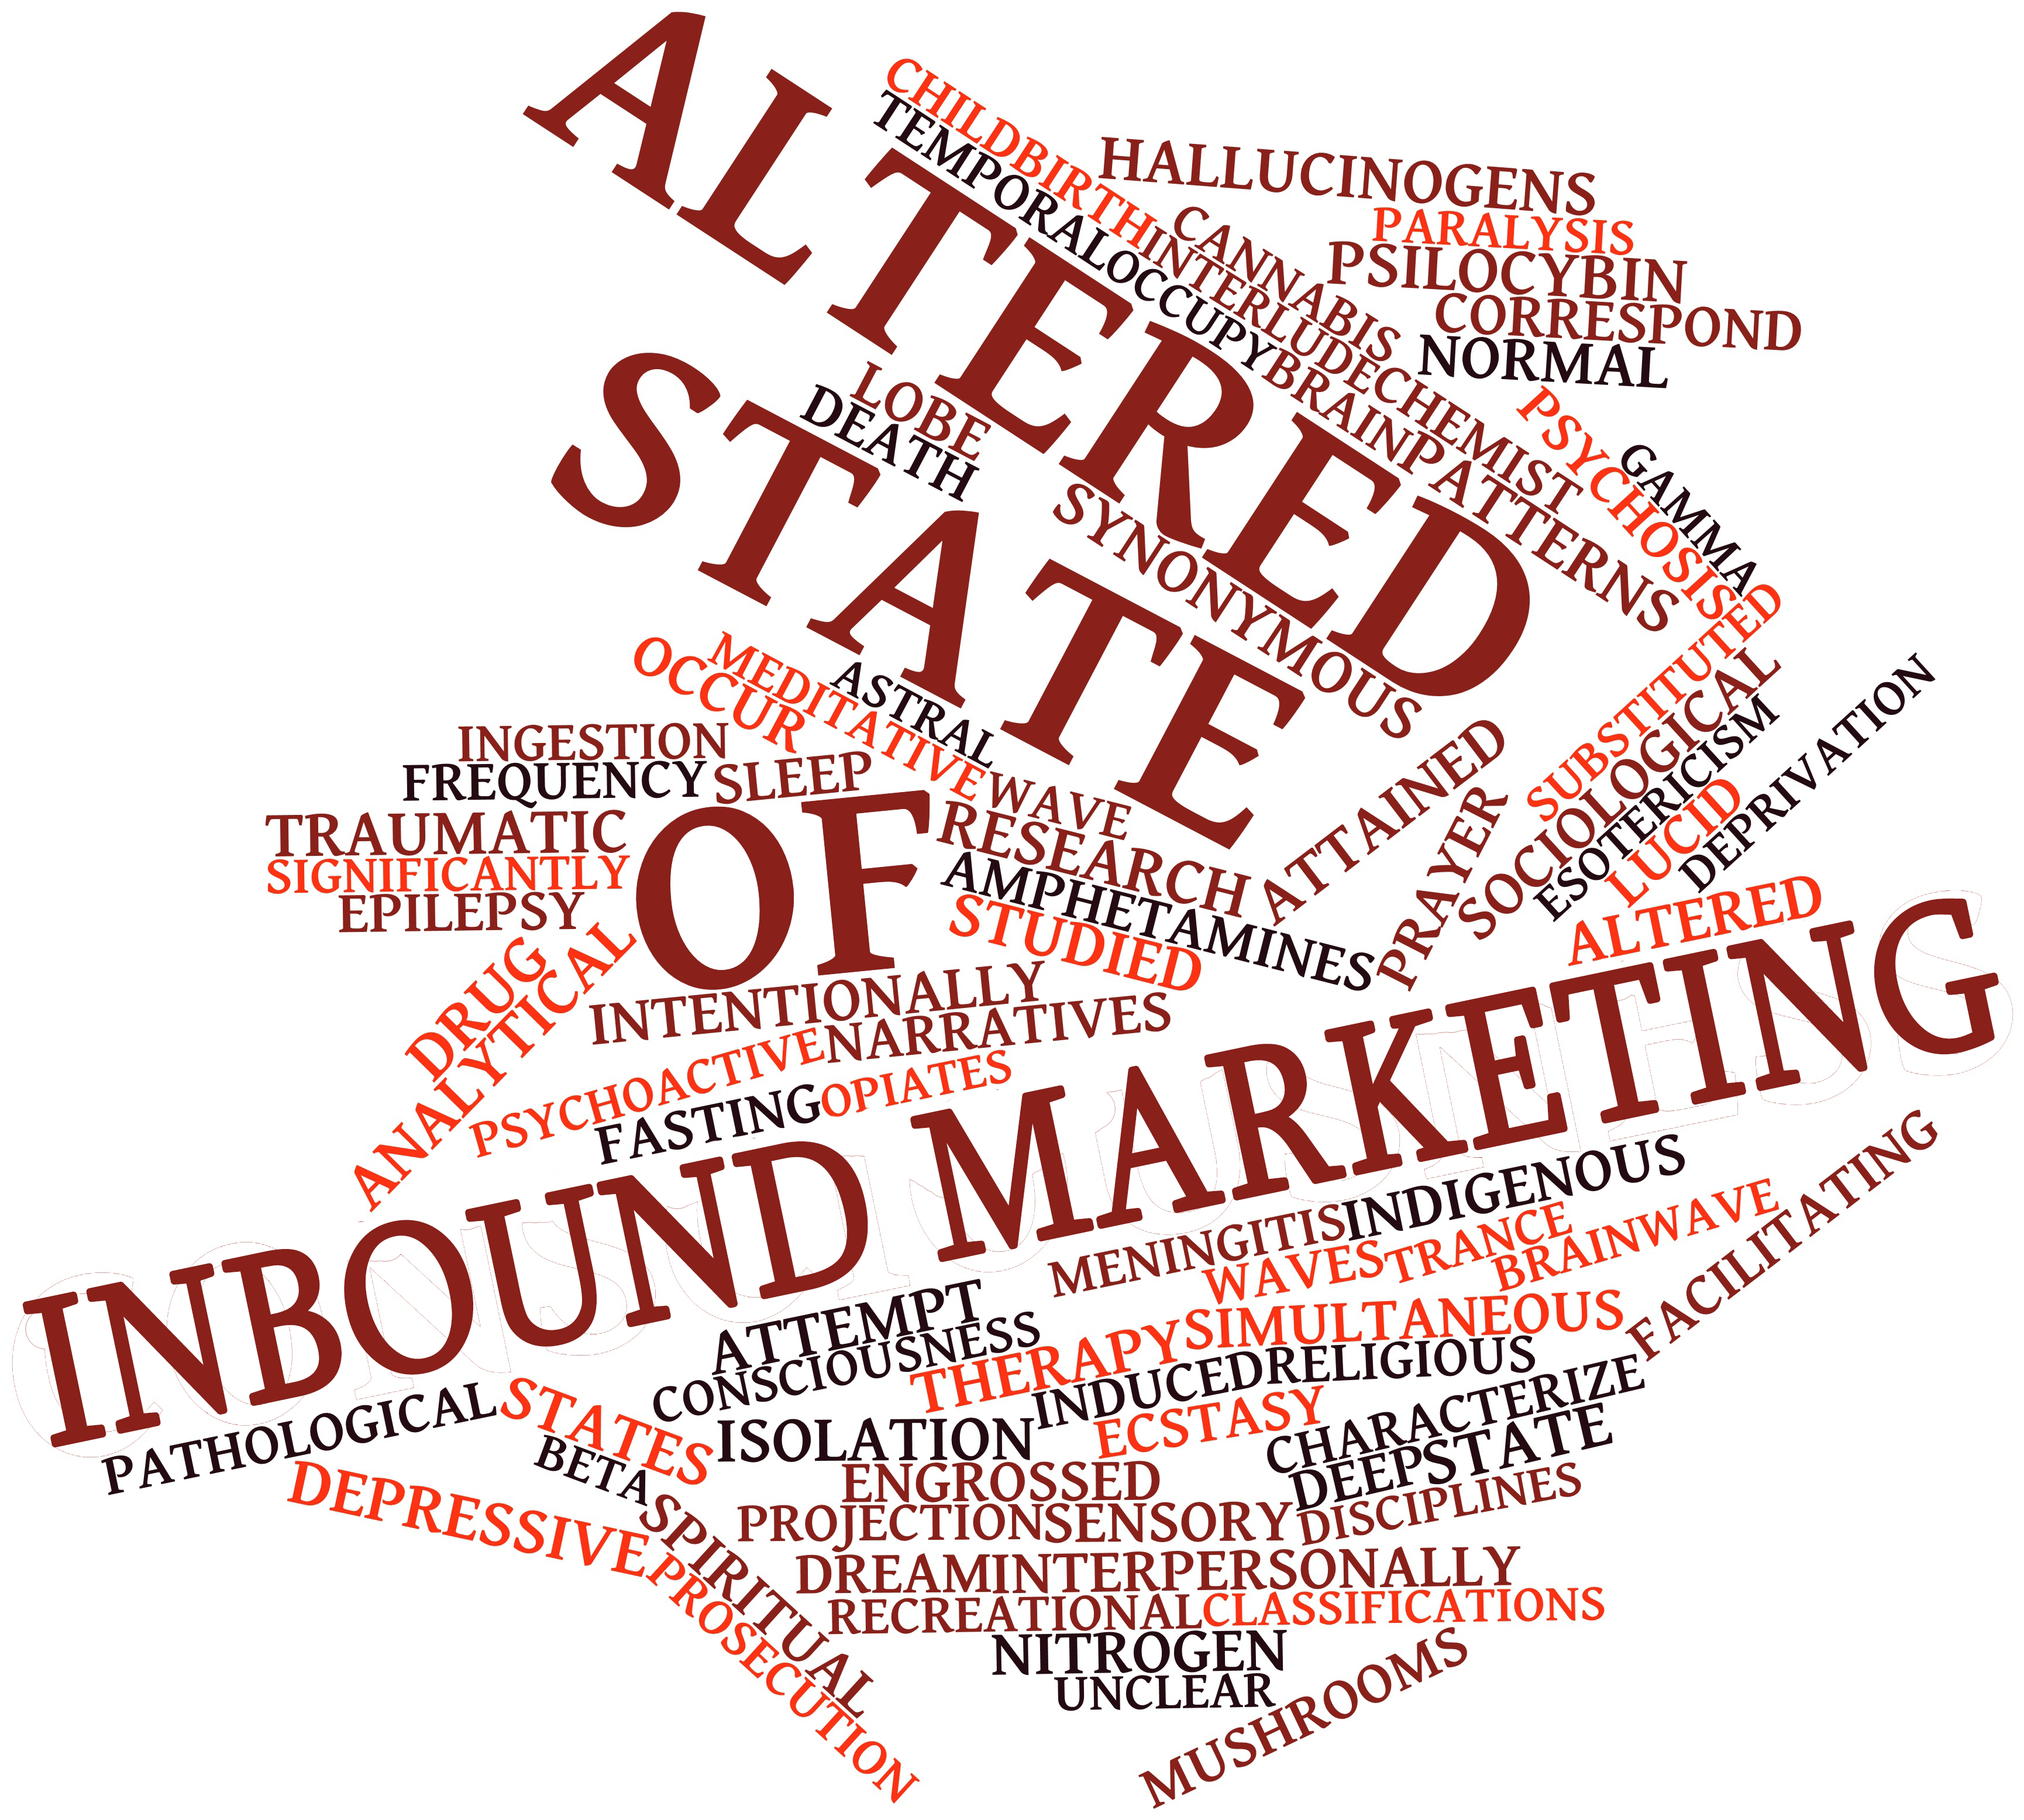 The Altered State of Inbound Marketing